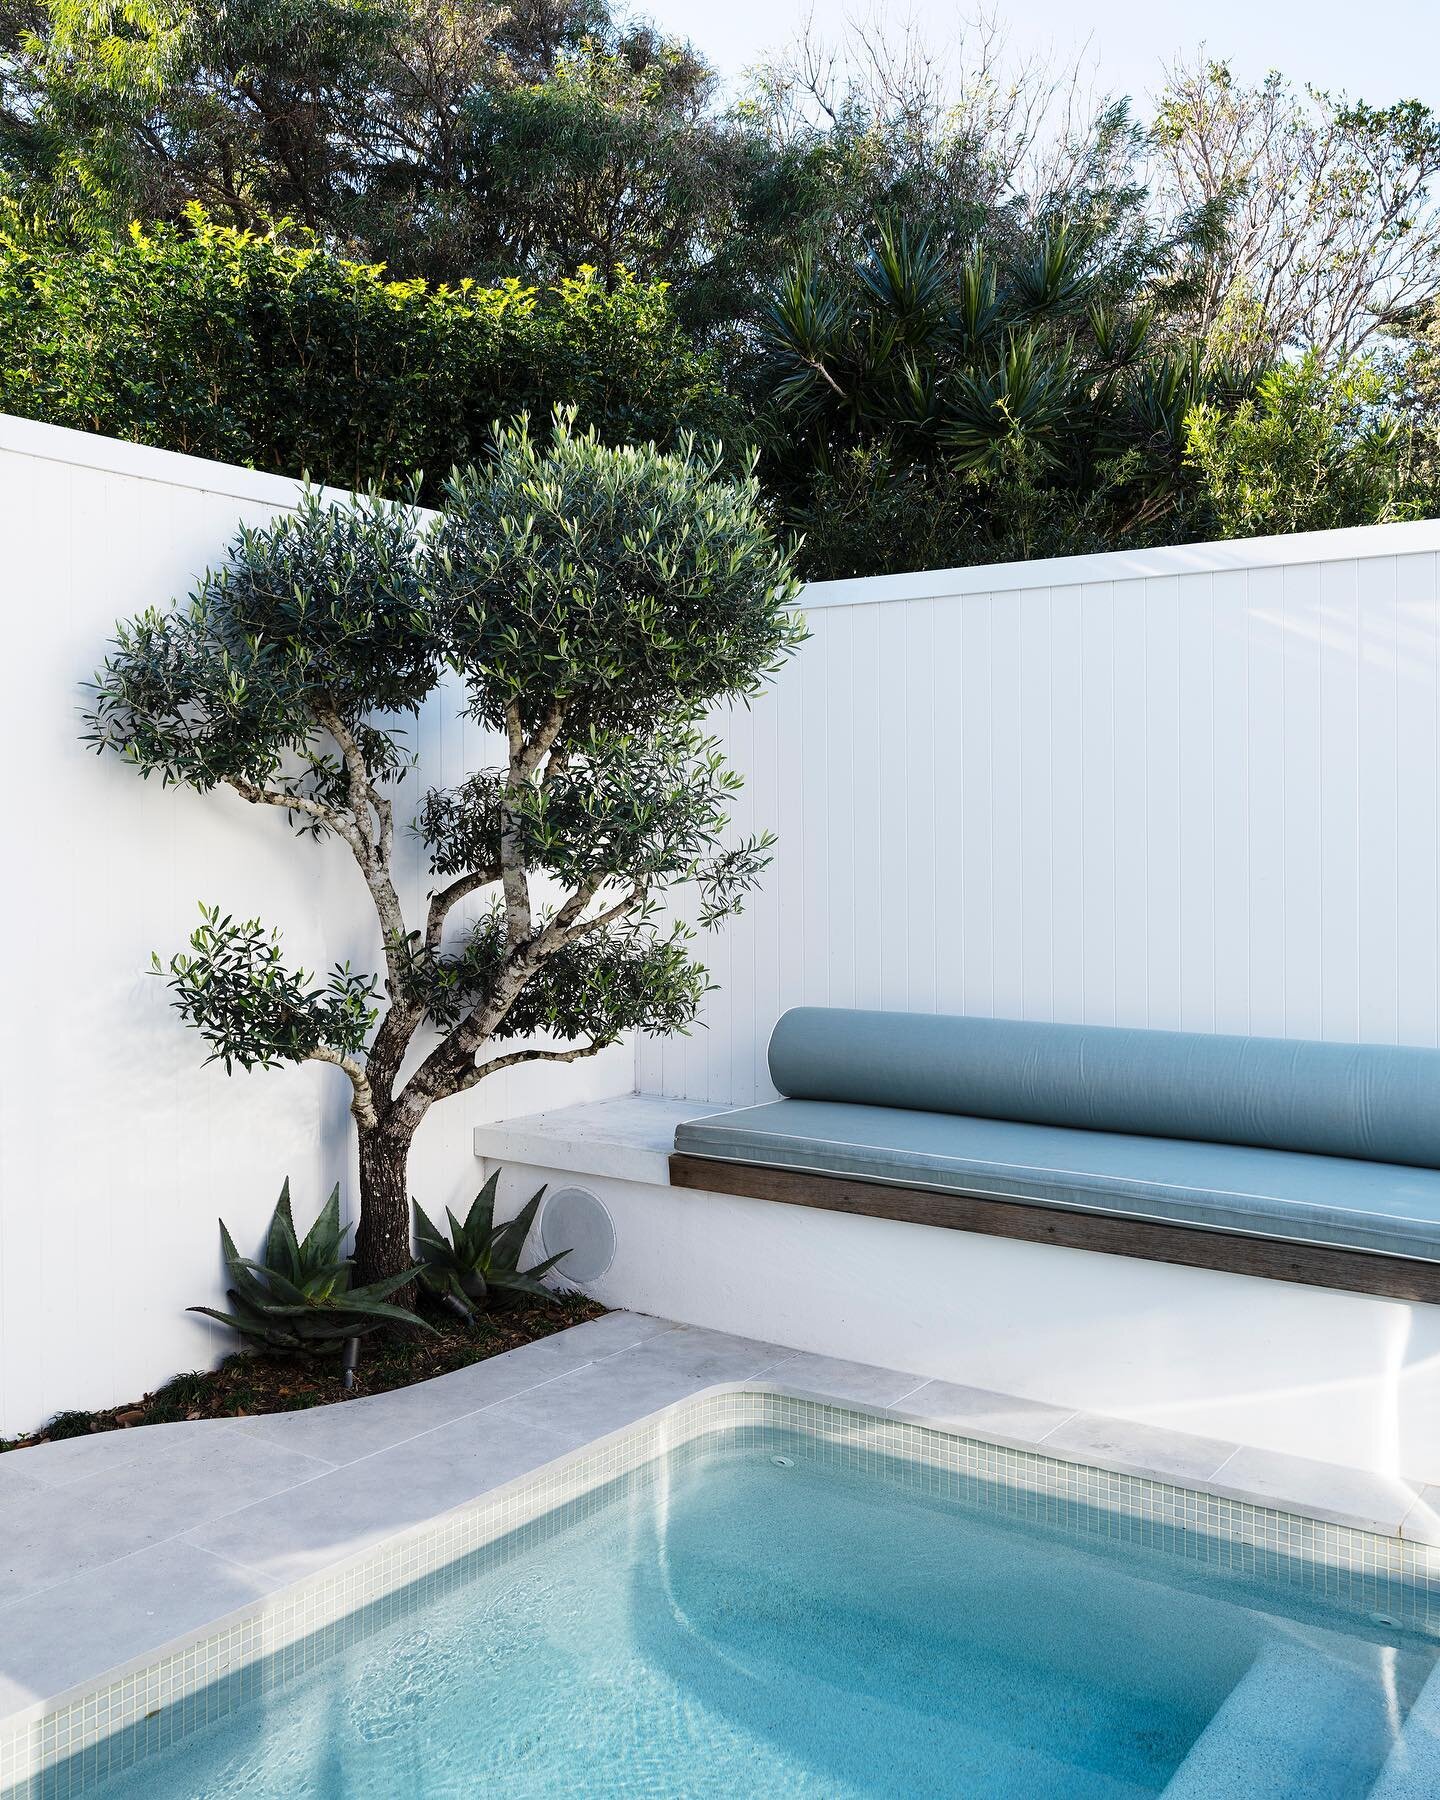 A mediterranean pocket sized garden in the eastern suburbs. The plunge pool features paired back finishes and feminine line styles. The pool equipment is cleverly hidden underneath the daybed and the Olive cloud tree gives a nod the style 🤍 🤍🤍
.
.